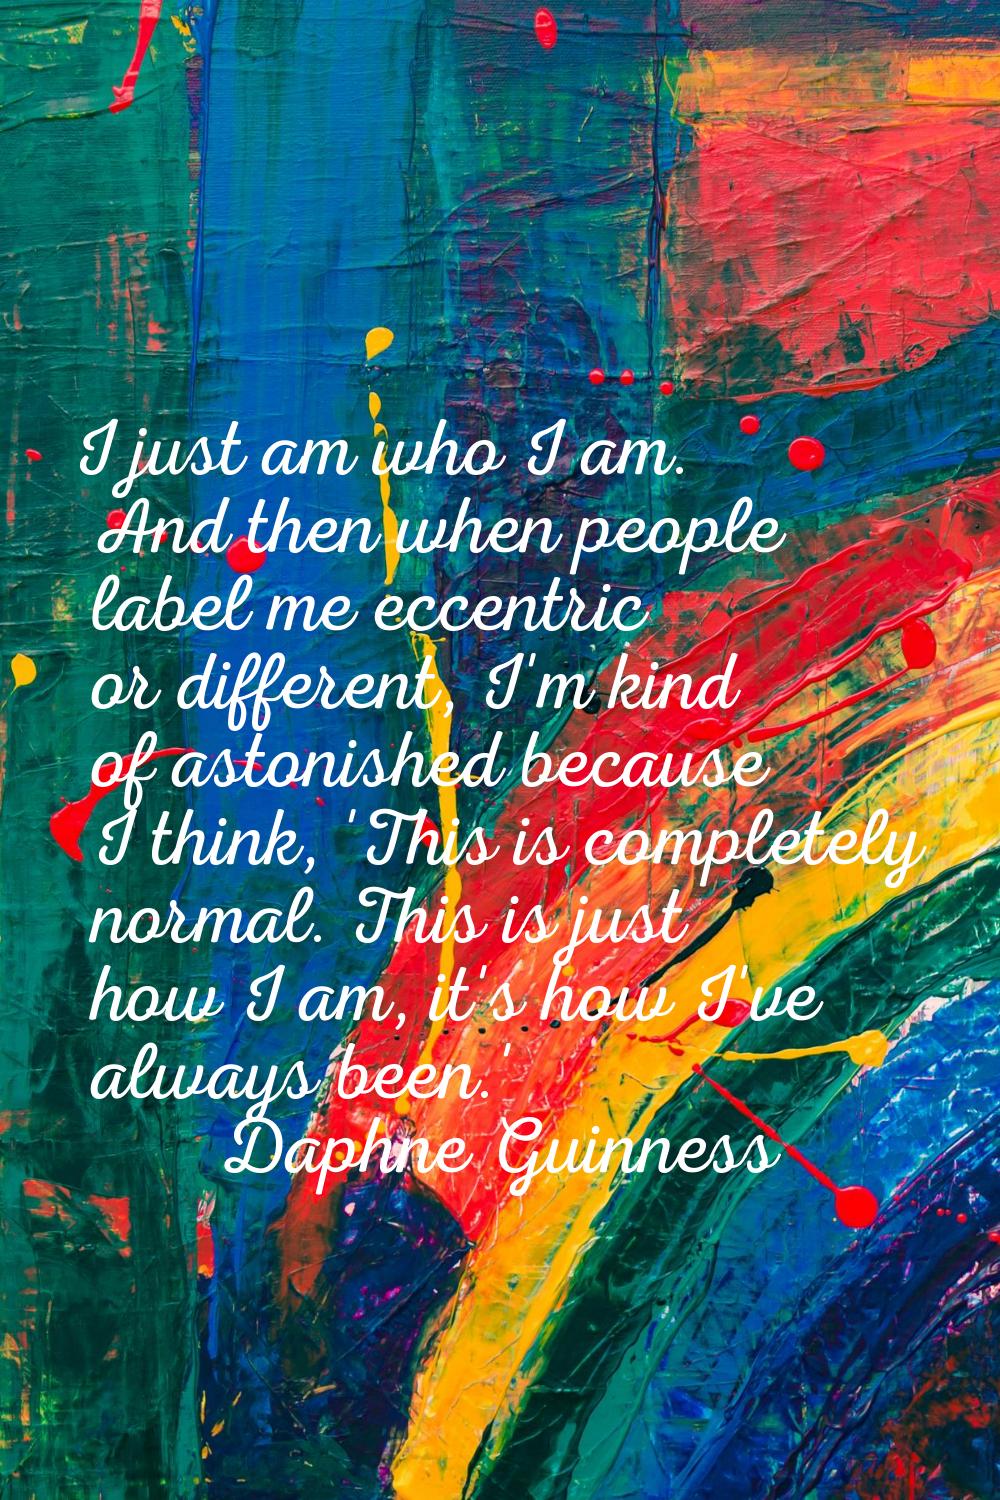 I just am who I am. And then when people label me eccentric or different, I'm kind of astonished be